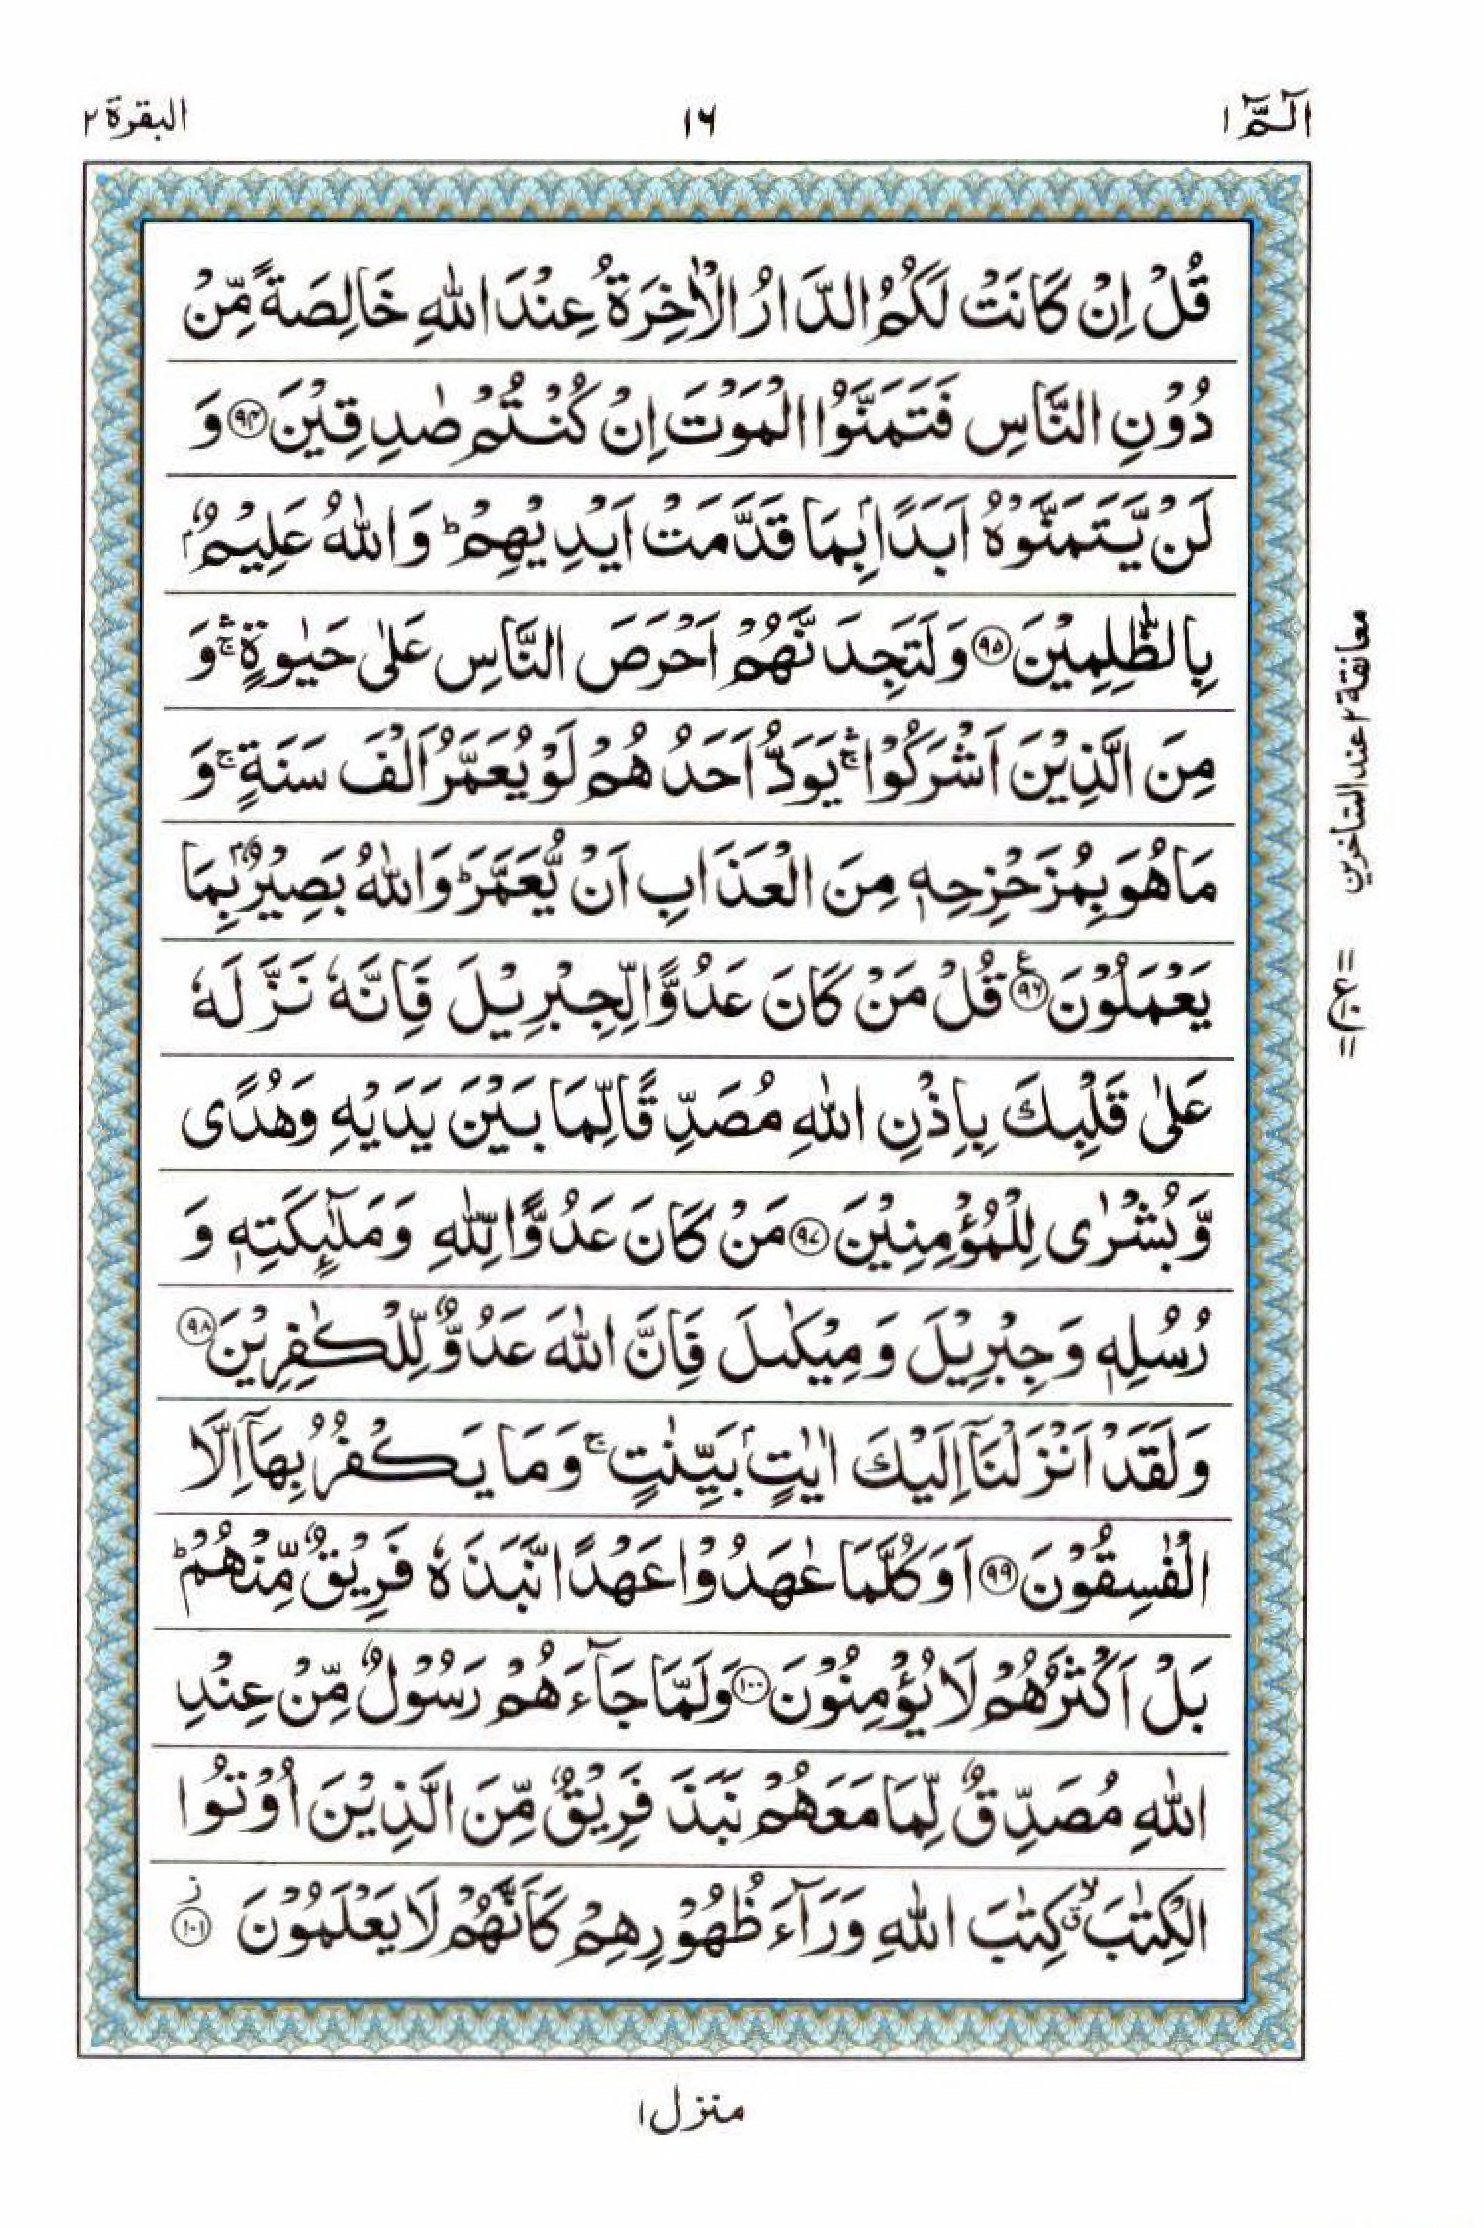 Read 15 Lines Quran, Part / Chapter / Siparah 1 Page 16